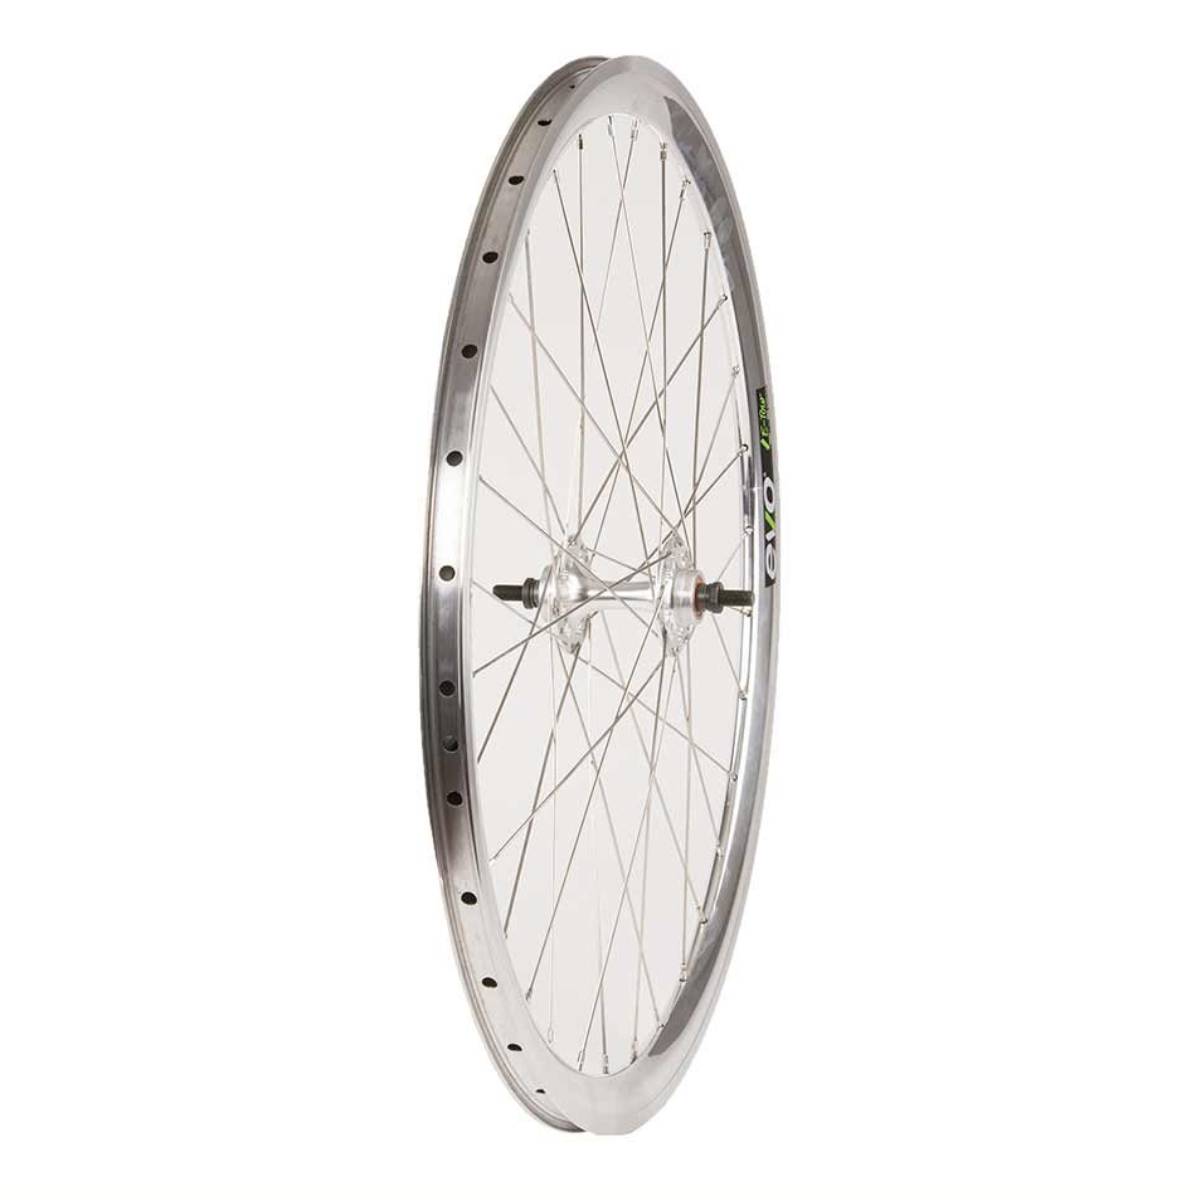 Wheel Shop, TRACK , EVO ETour 16 Noir / Stainless  Roue, Arriere, 700C, 32 rayons, TH51, Bolton